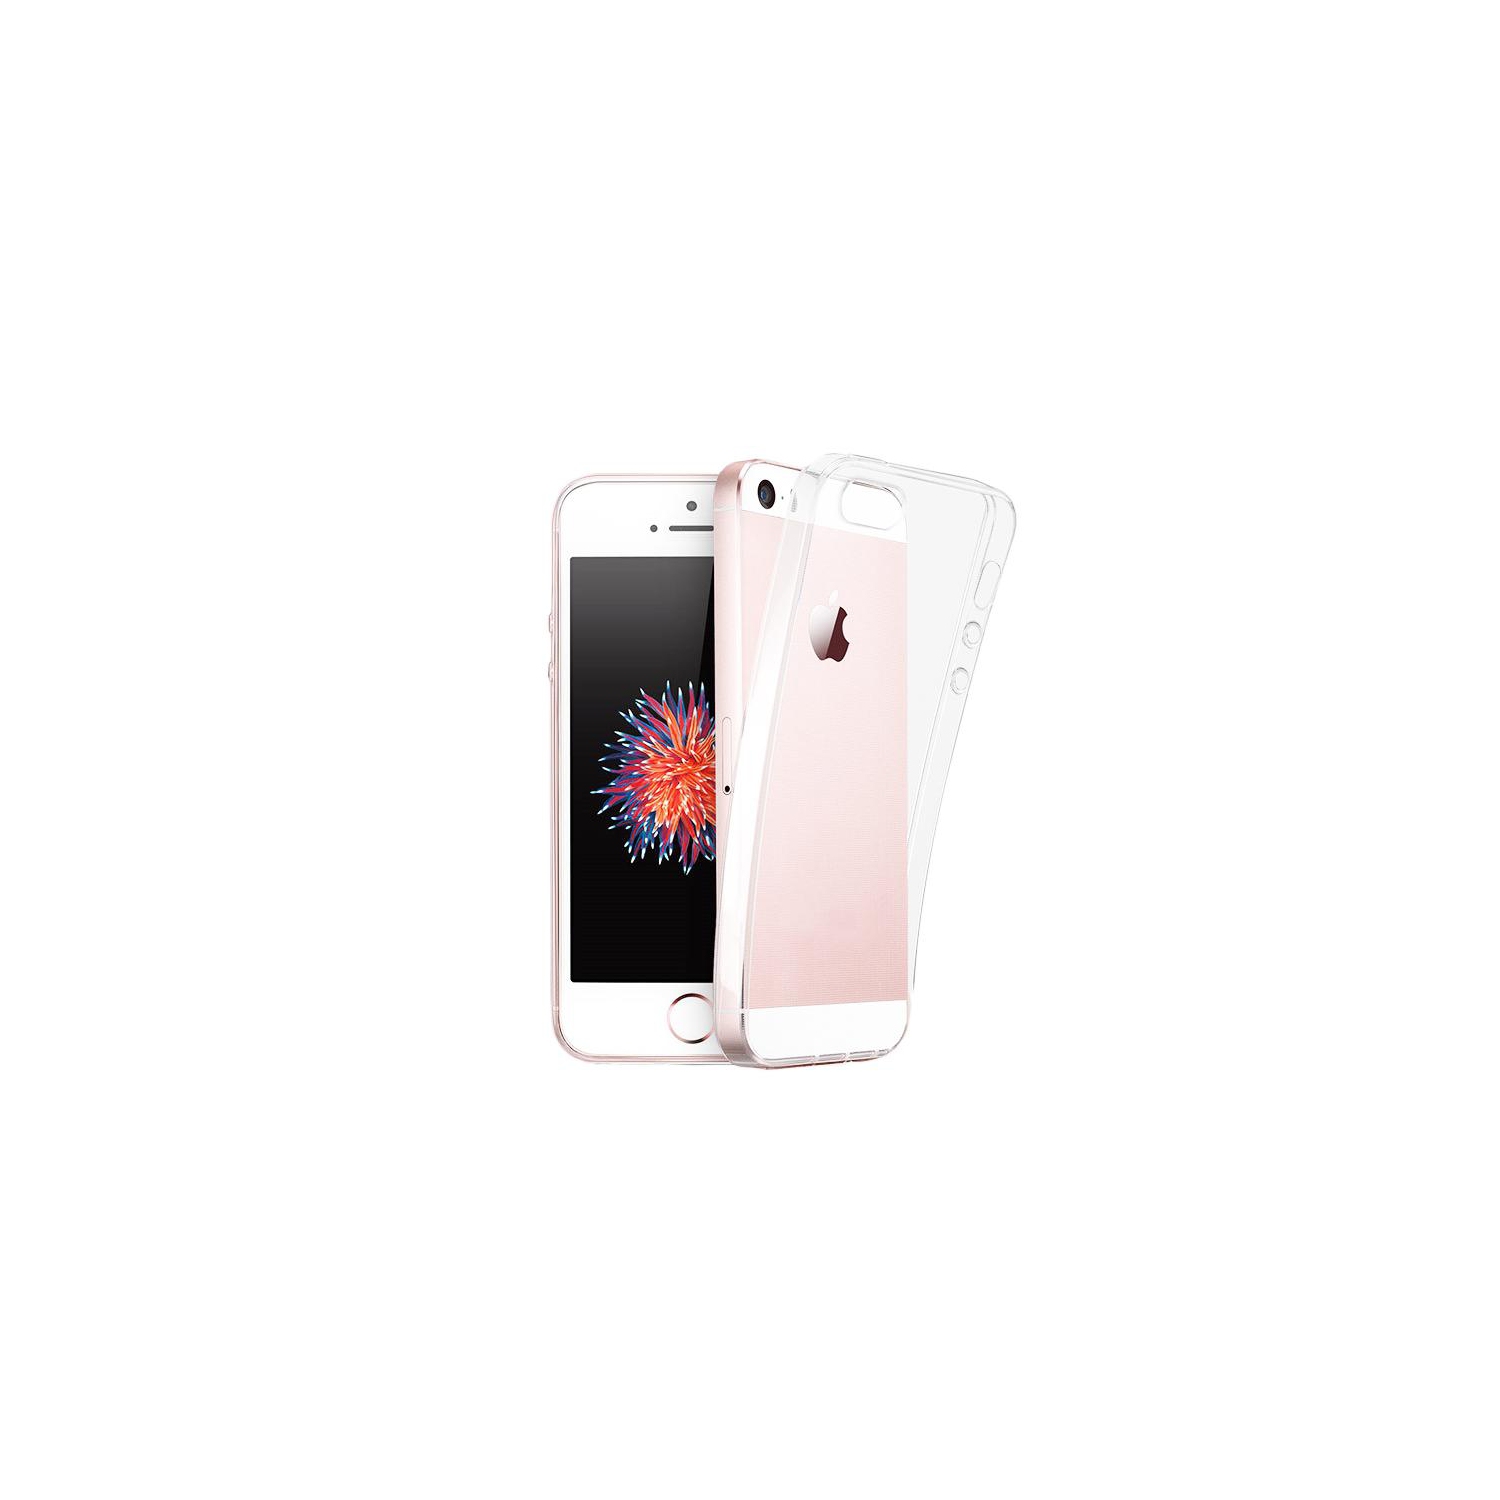 PANDACO Clear Case for iPhone 5/5s/SE (2016)